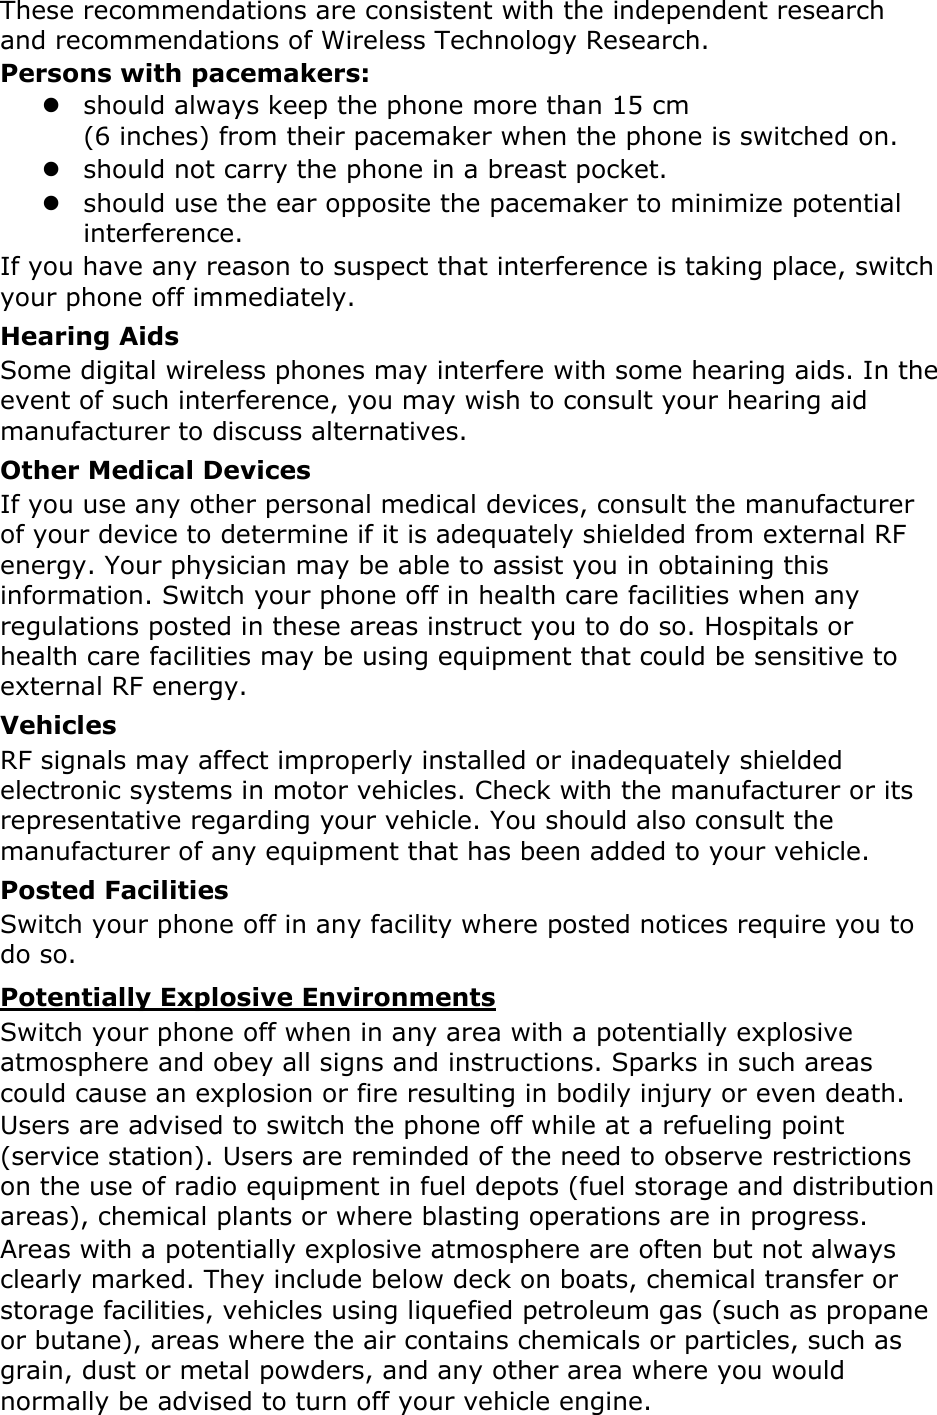 Page 15 of Samsung Electronics Co GTI9070P Cellular/PCS GSM/EDGE/WCDMA Phone with WLAN, RFID and Bluetooth User Manual